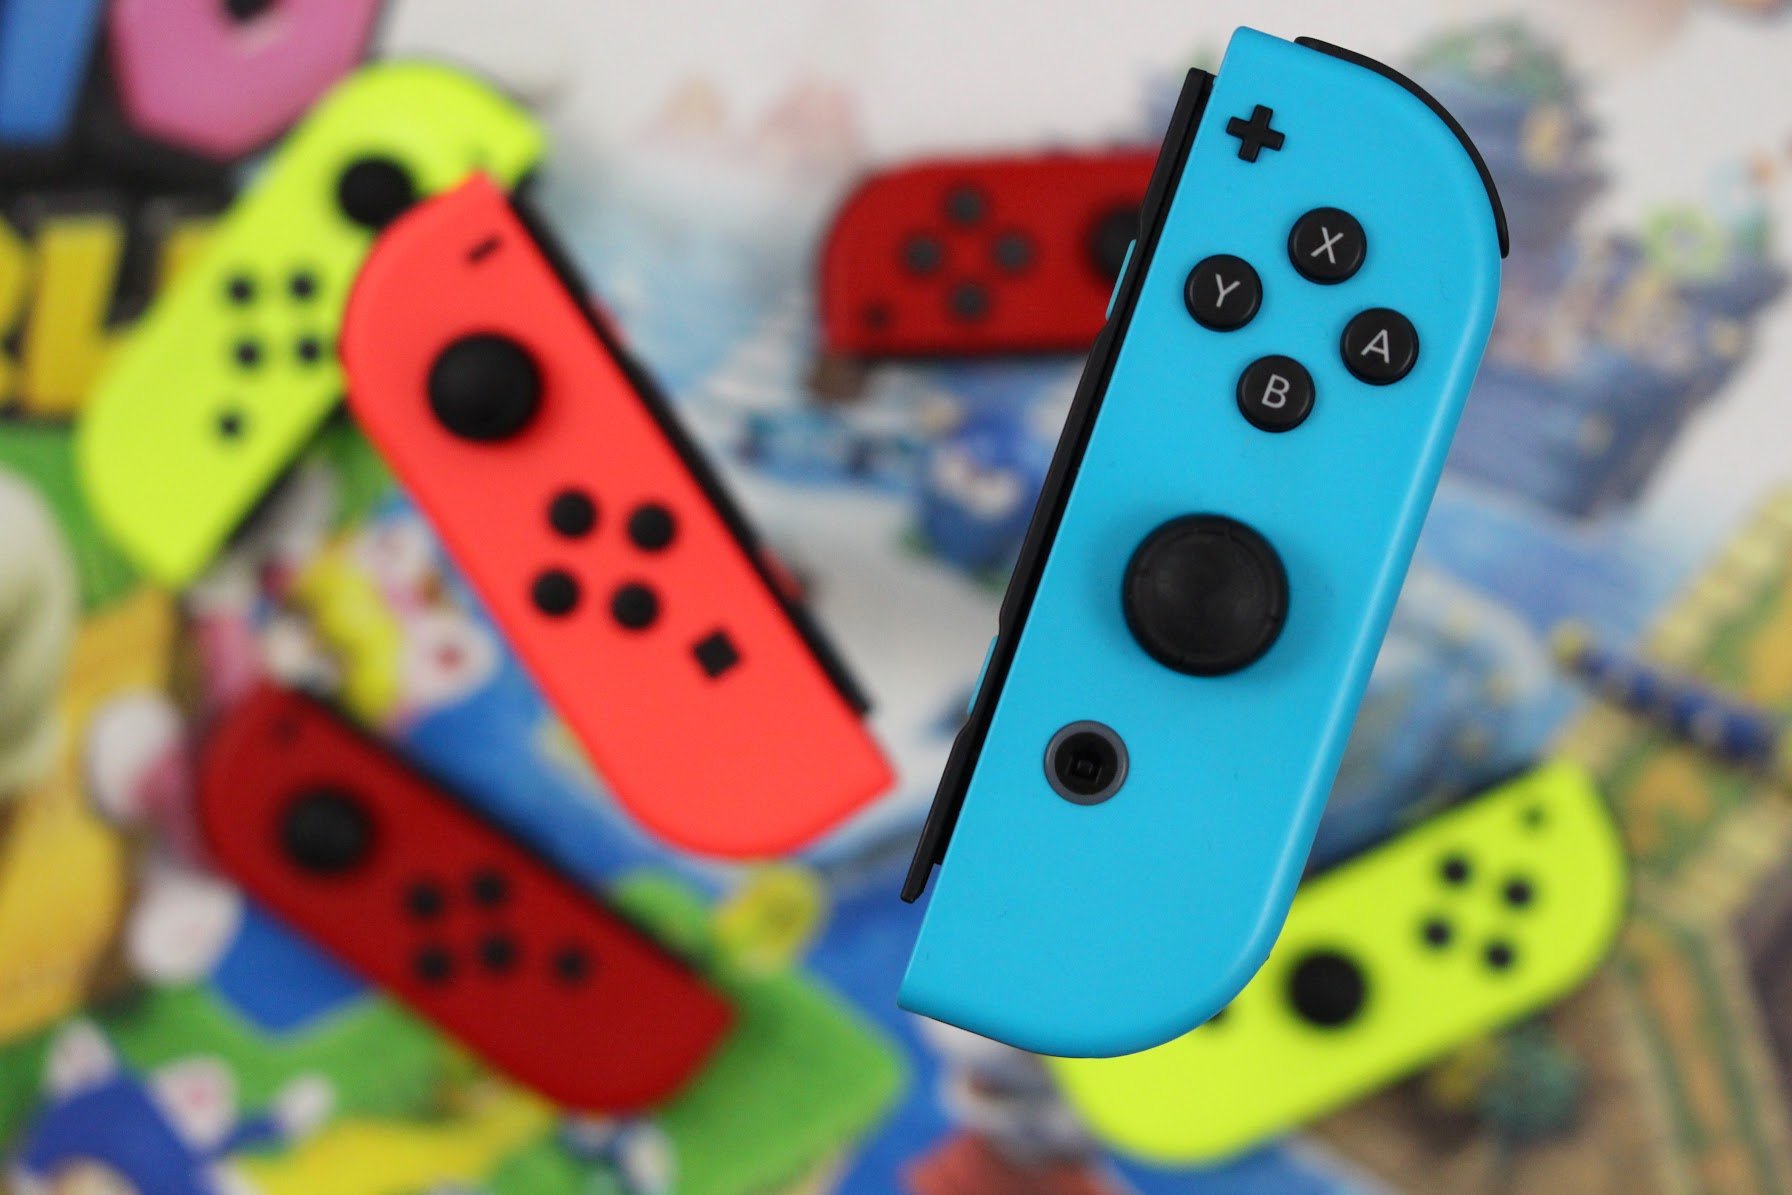 Joy-Con drift lawsuit potentially being investigated by USA law firm